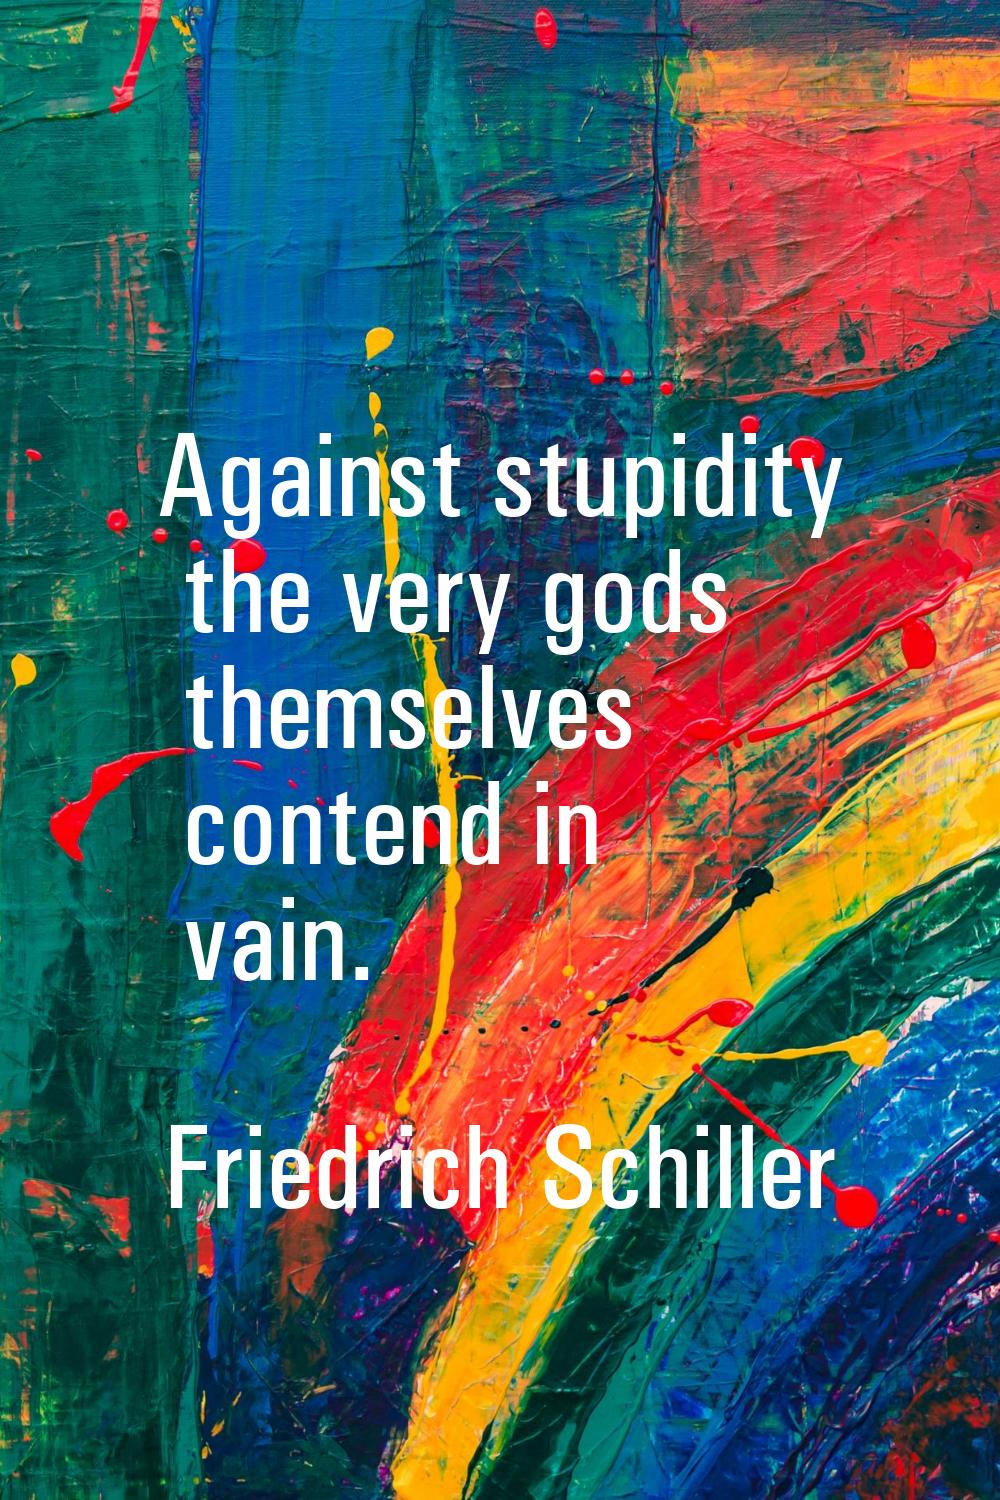 Against stupidity the very gods themselves contend in vain.